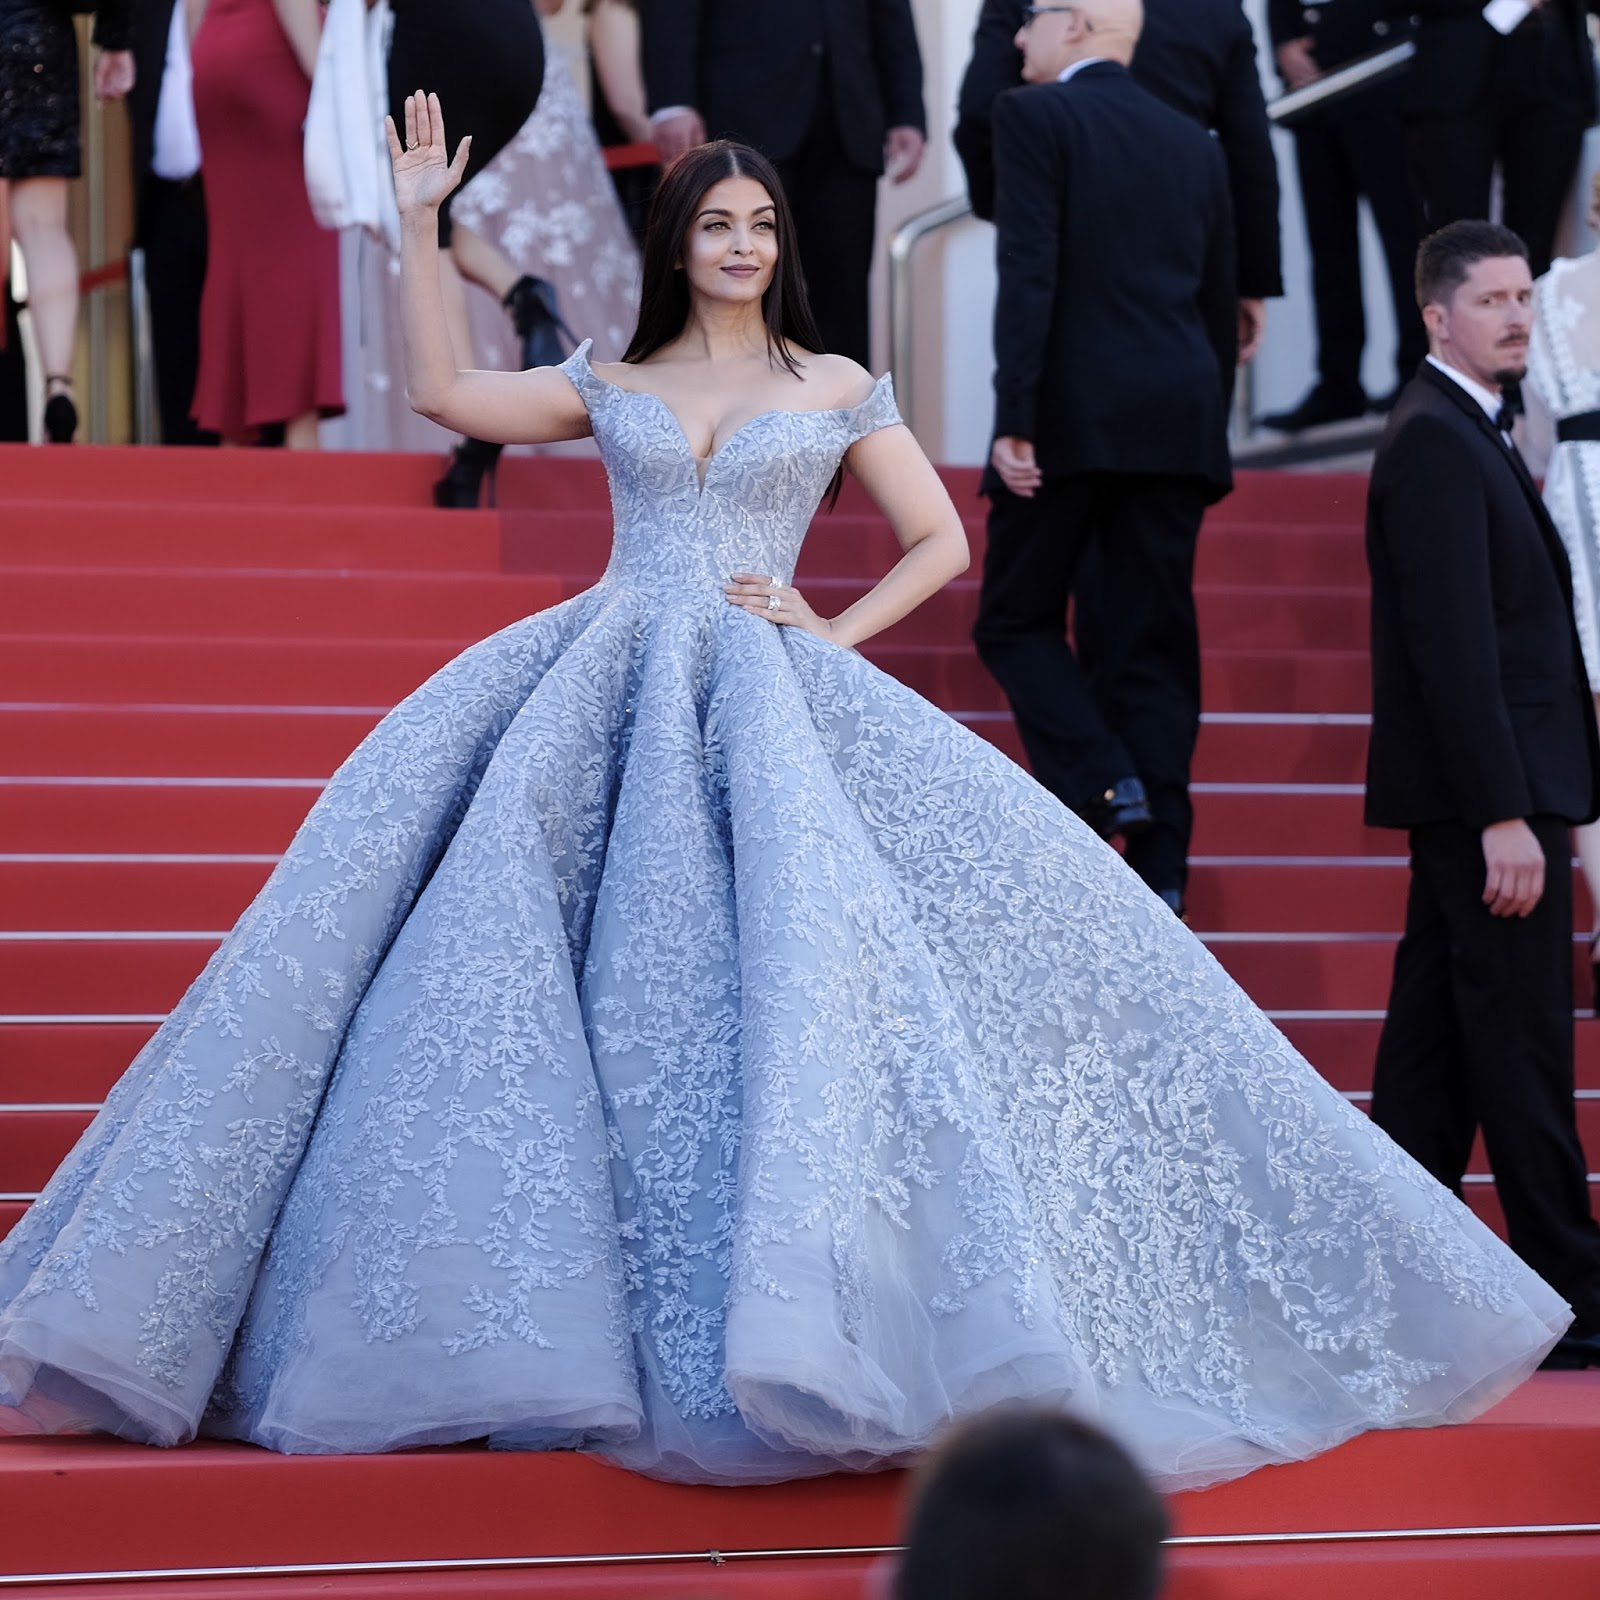 Aishwarya Rai Bachchan Looks Irresistibly Sexy in a Blue Michael Cinco Gown At 'Okja' Premiere During The 70th Cannes Film Festival 2017